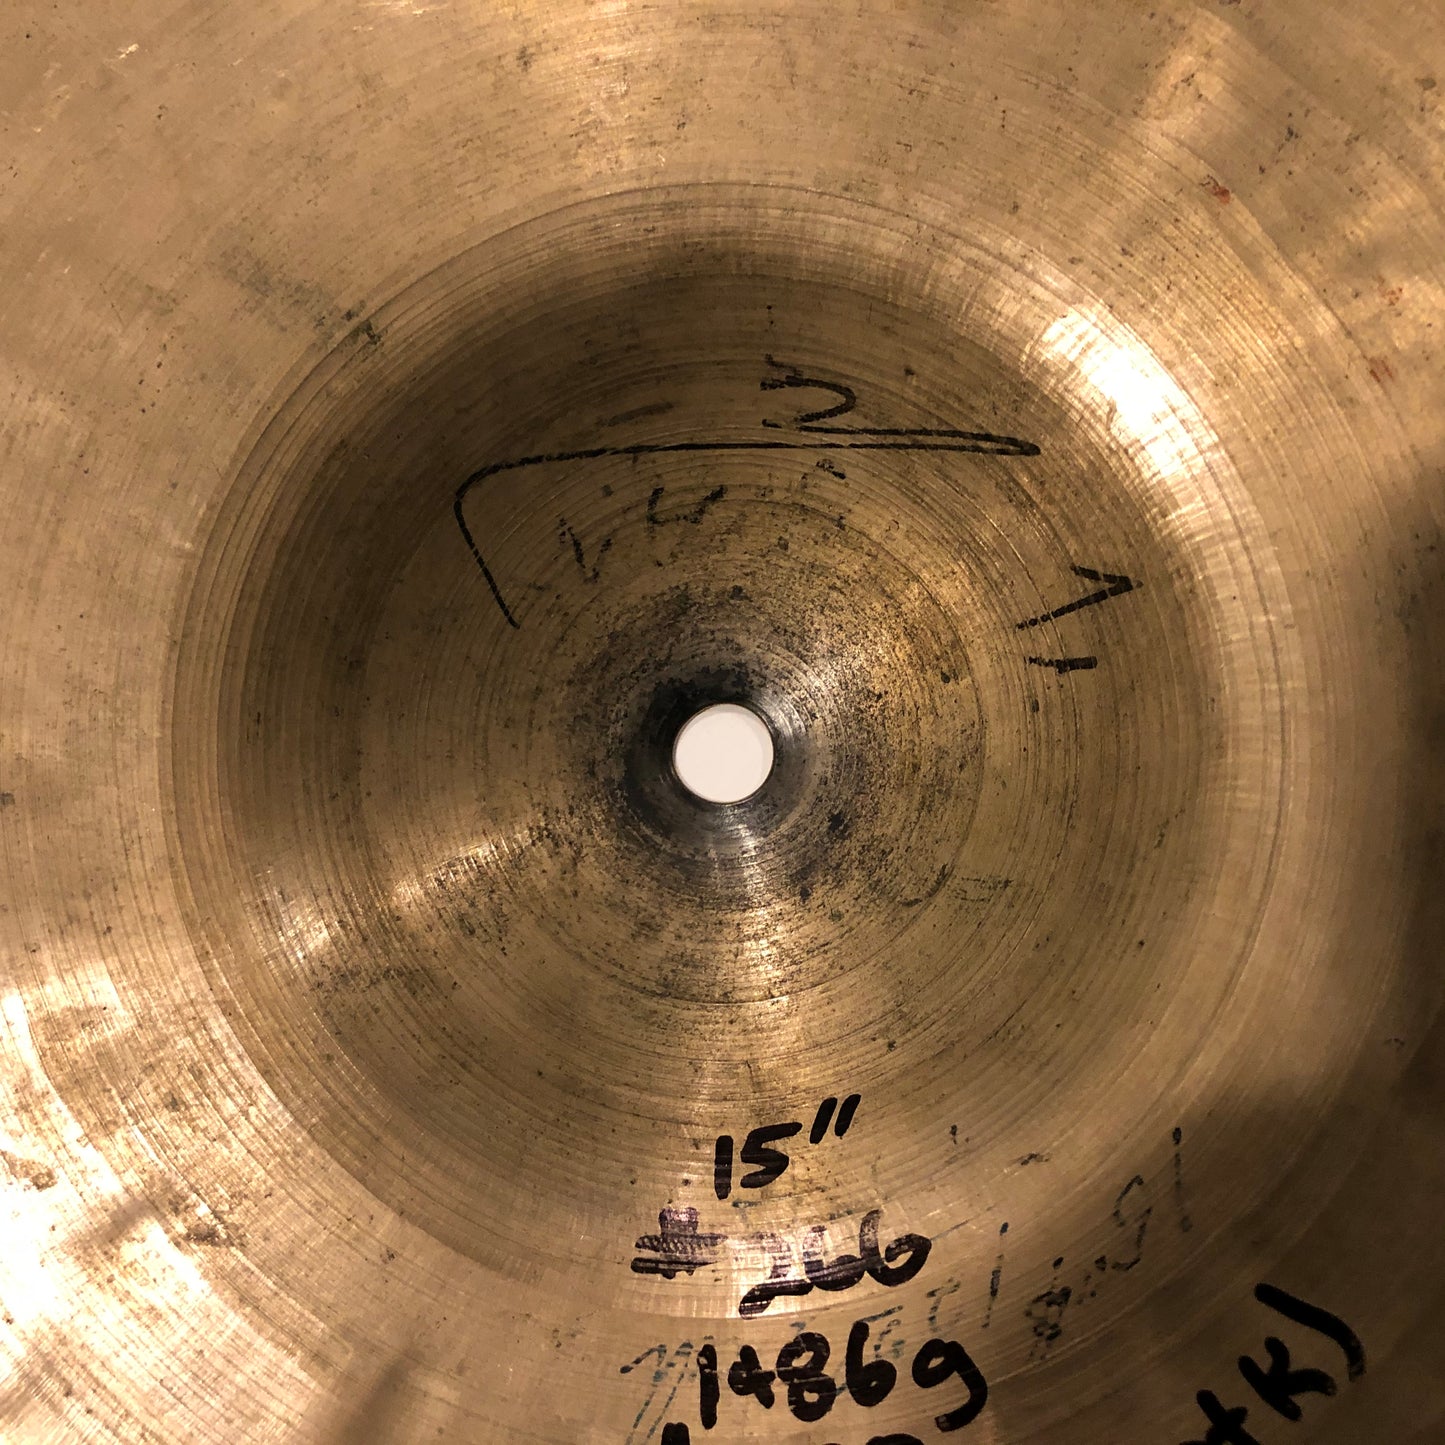 15" Zeltian 1930s/40s Small Ride Cymbal 1486g #266